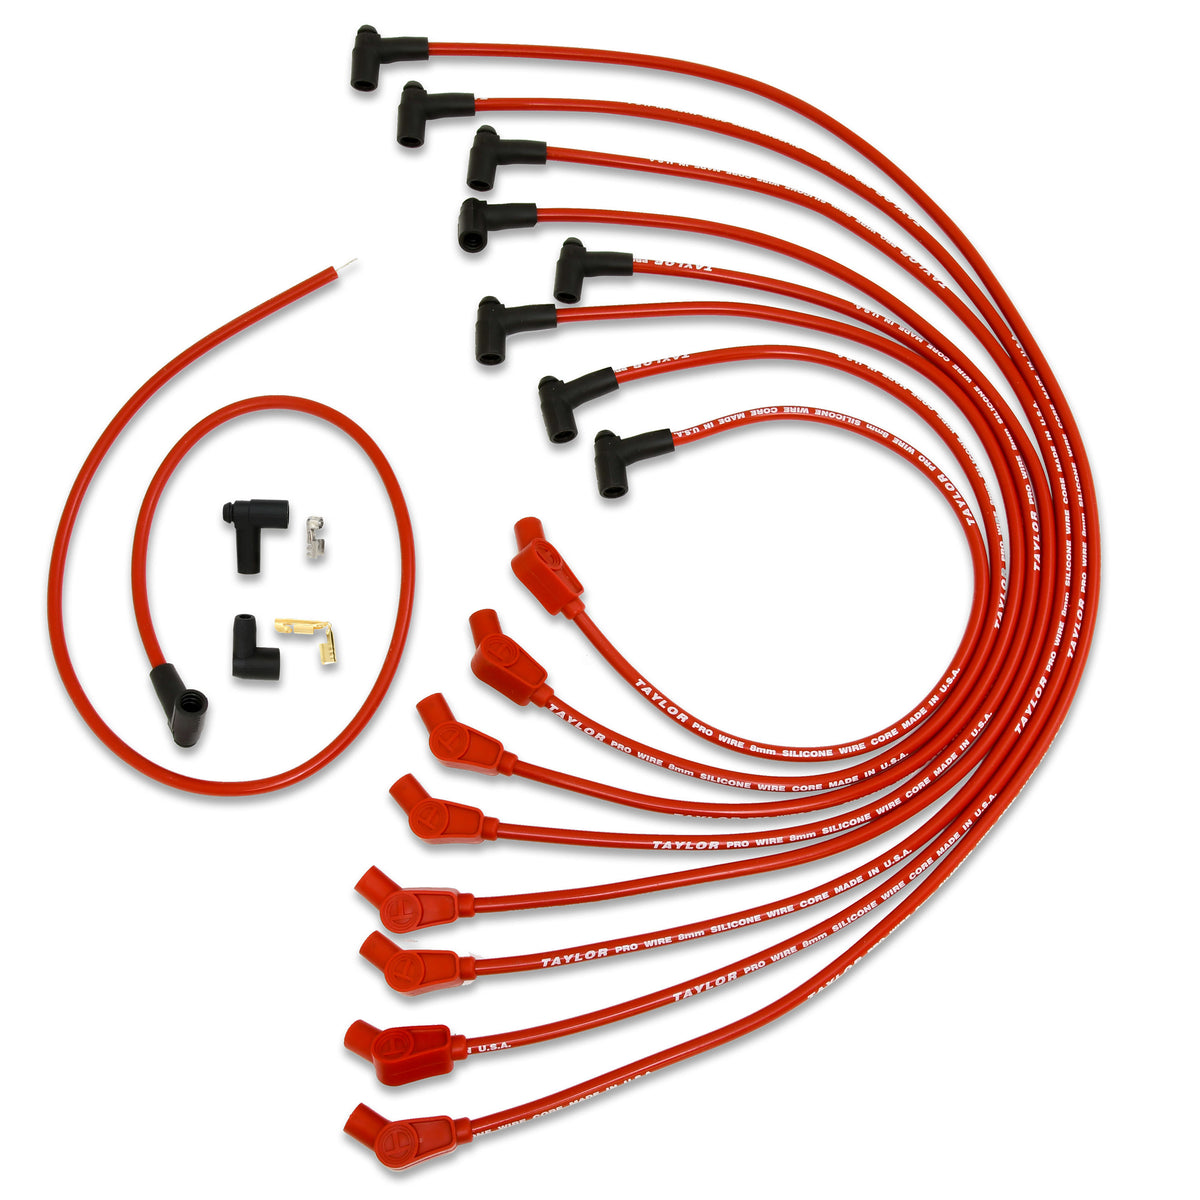 Taylor Cable 79218 10.4mm 409 Spiro Pro Race Fit Spark Plug Wires 135° Red